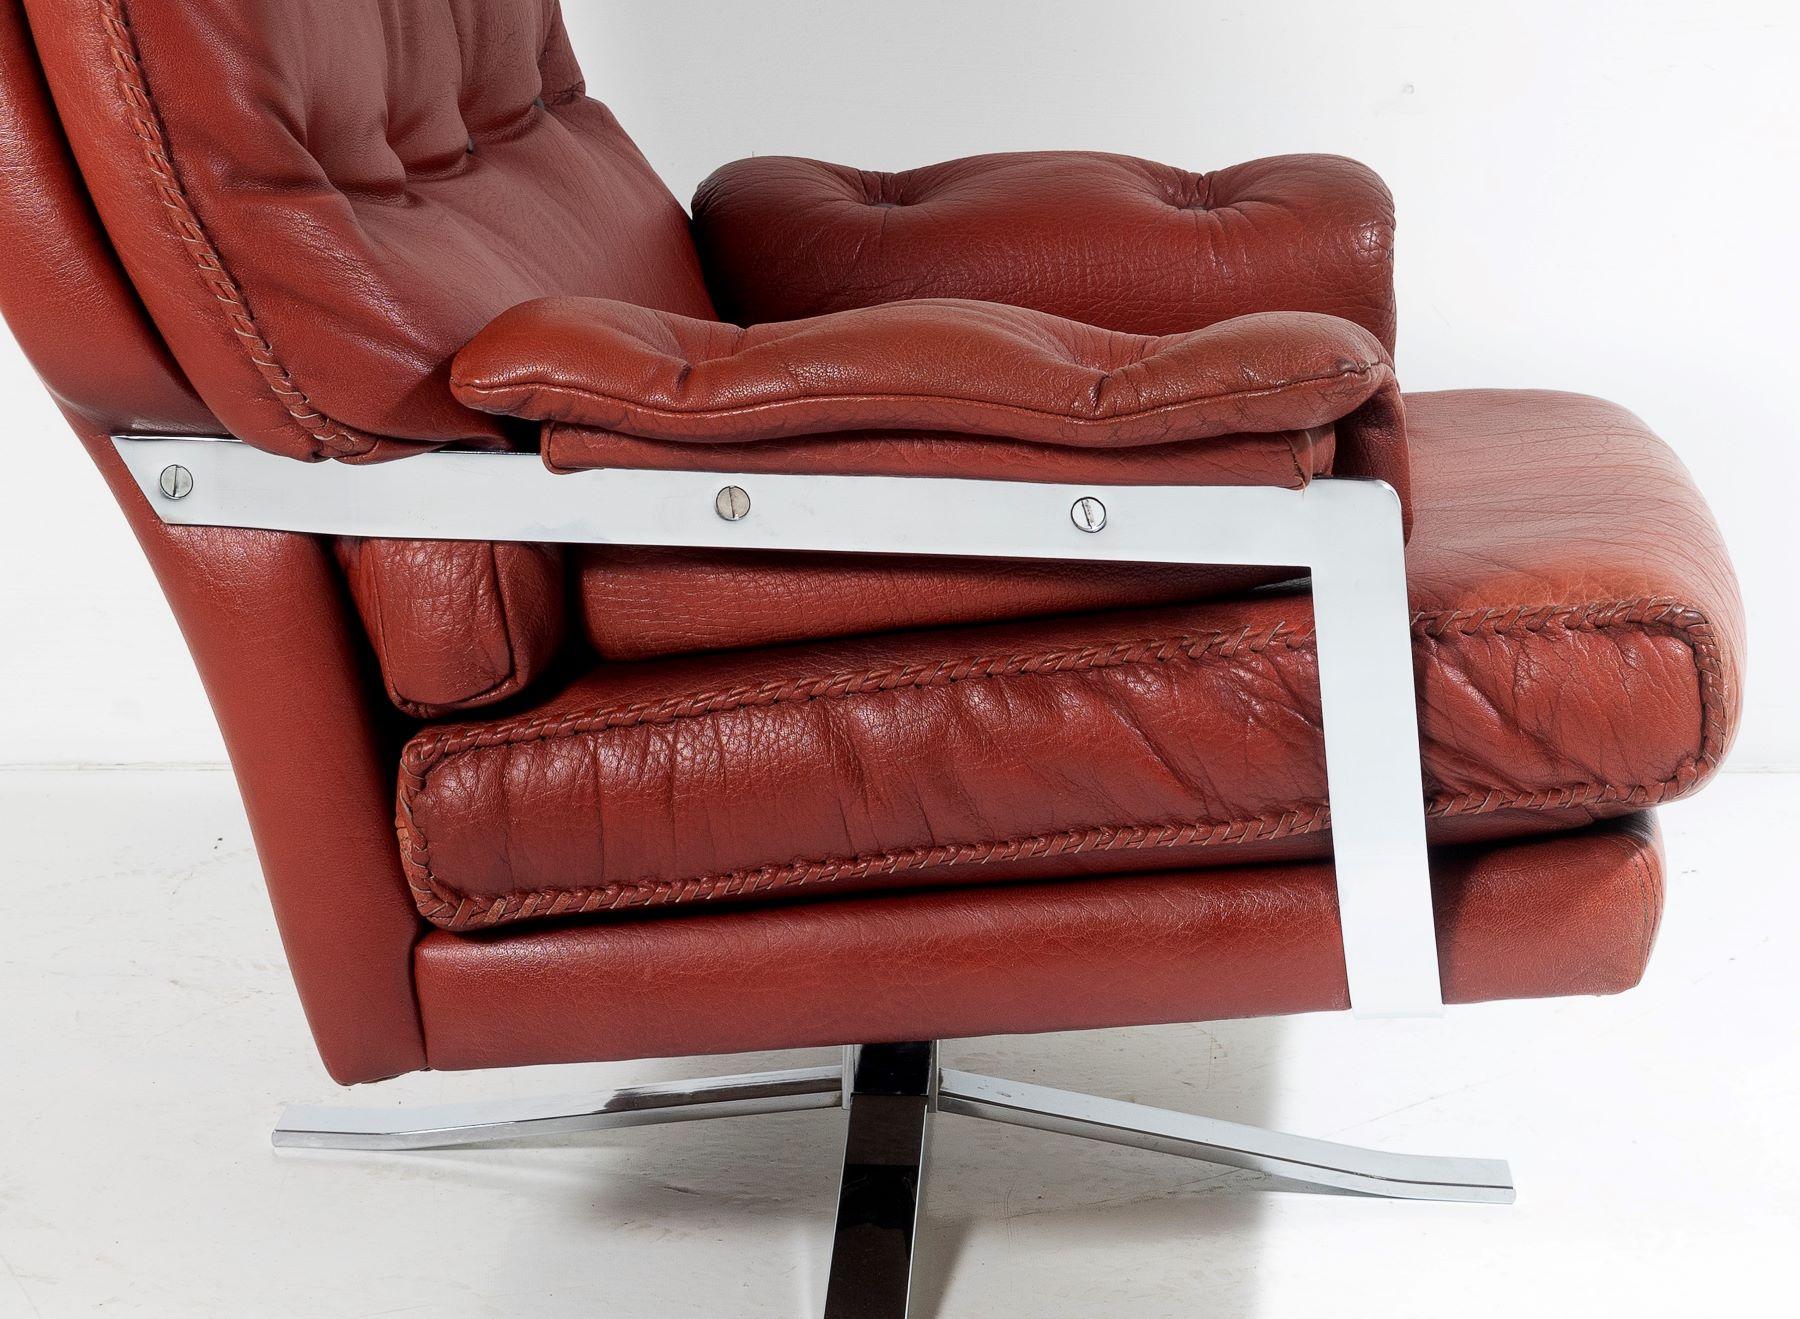 1960s Mid Centry Burnt Orange Brown Leather Swivel Chair in style of Arne Norell For Sale 4